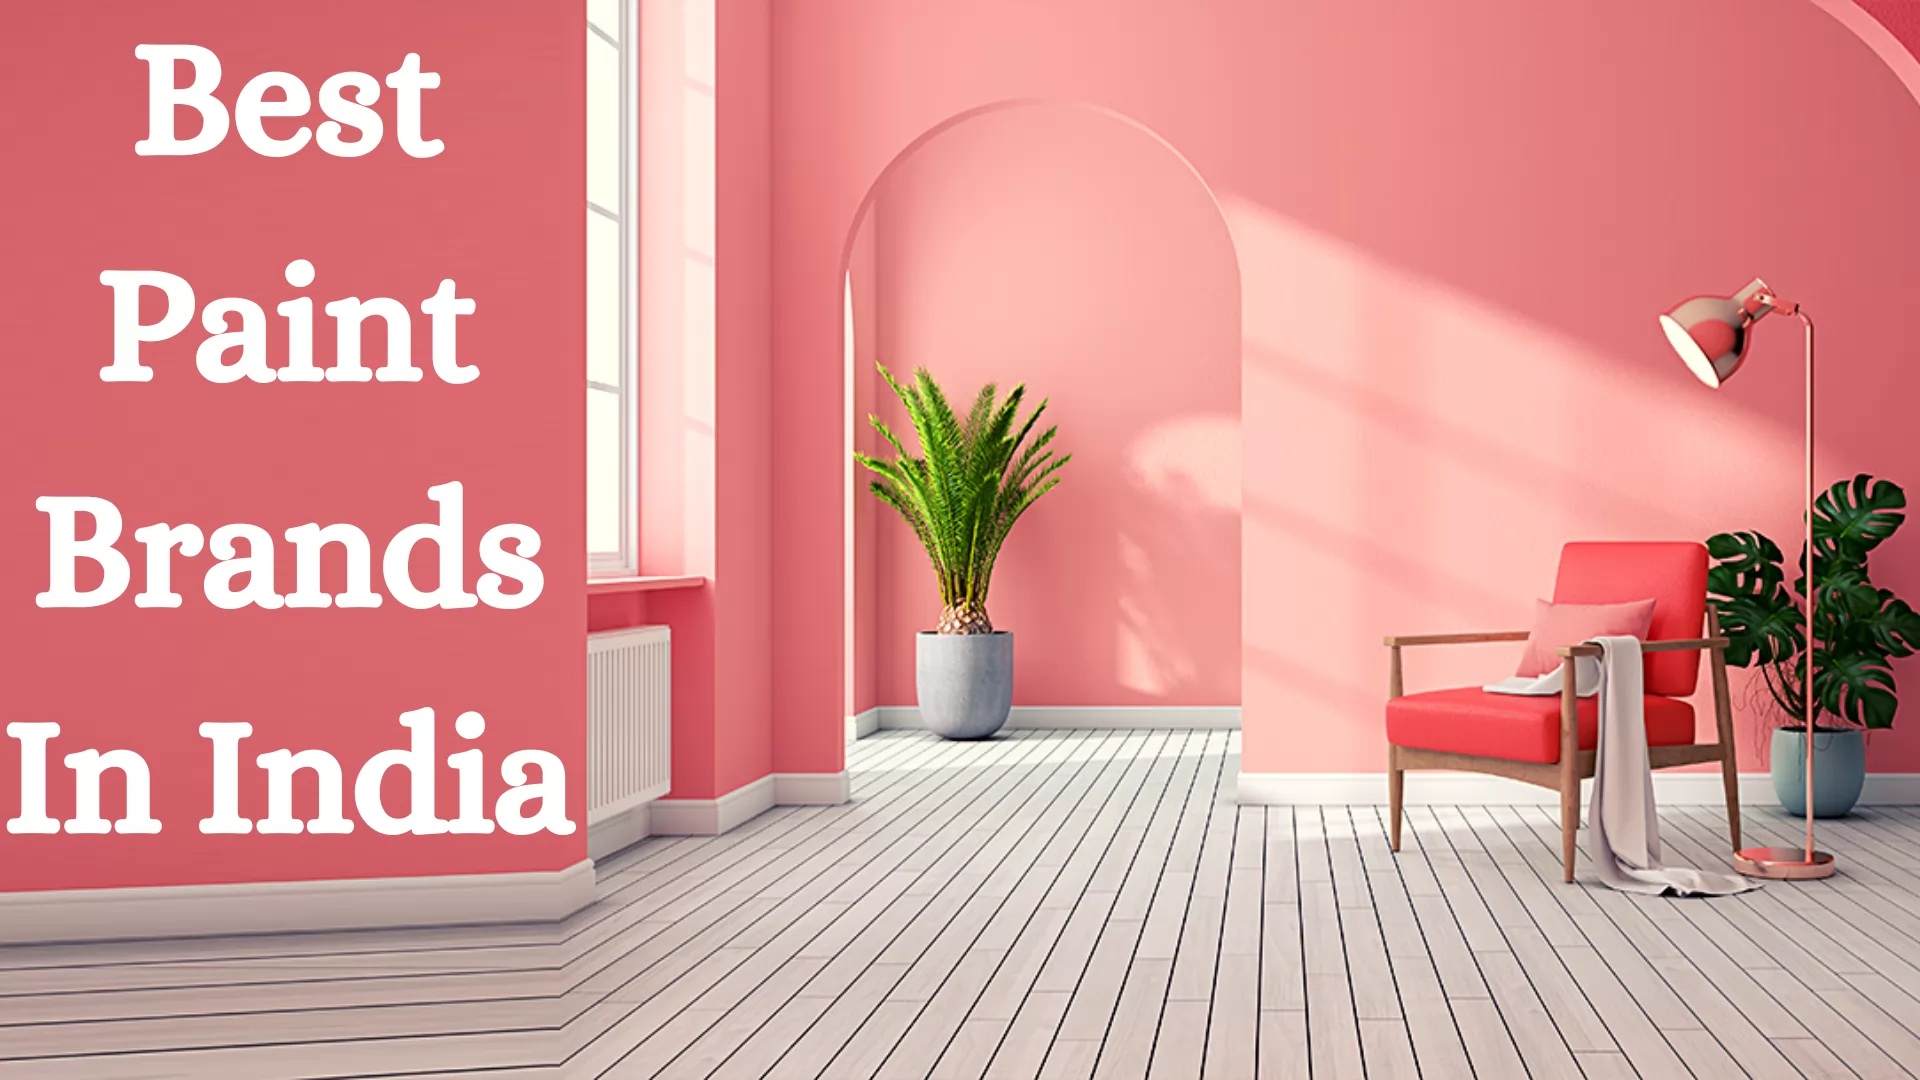 Best Paint Brands in India